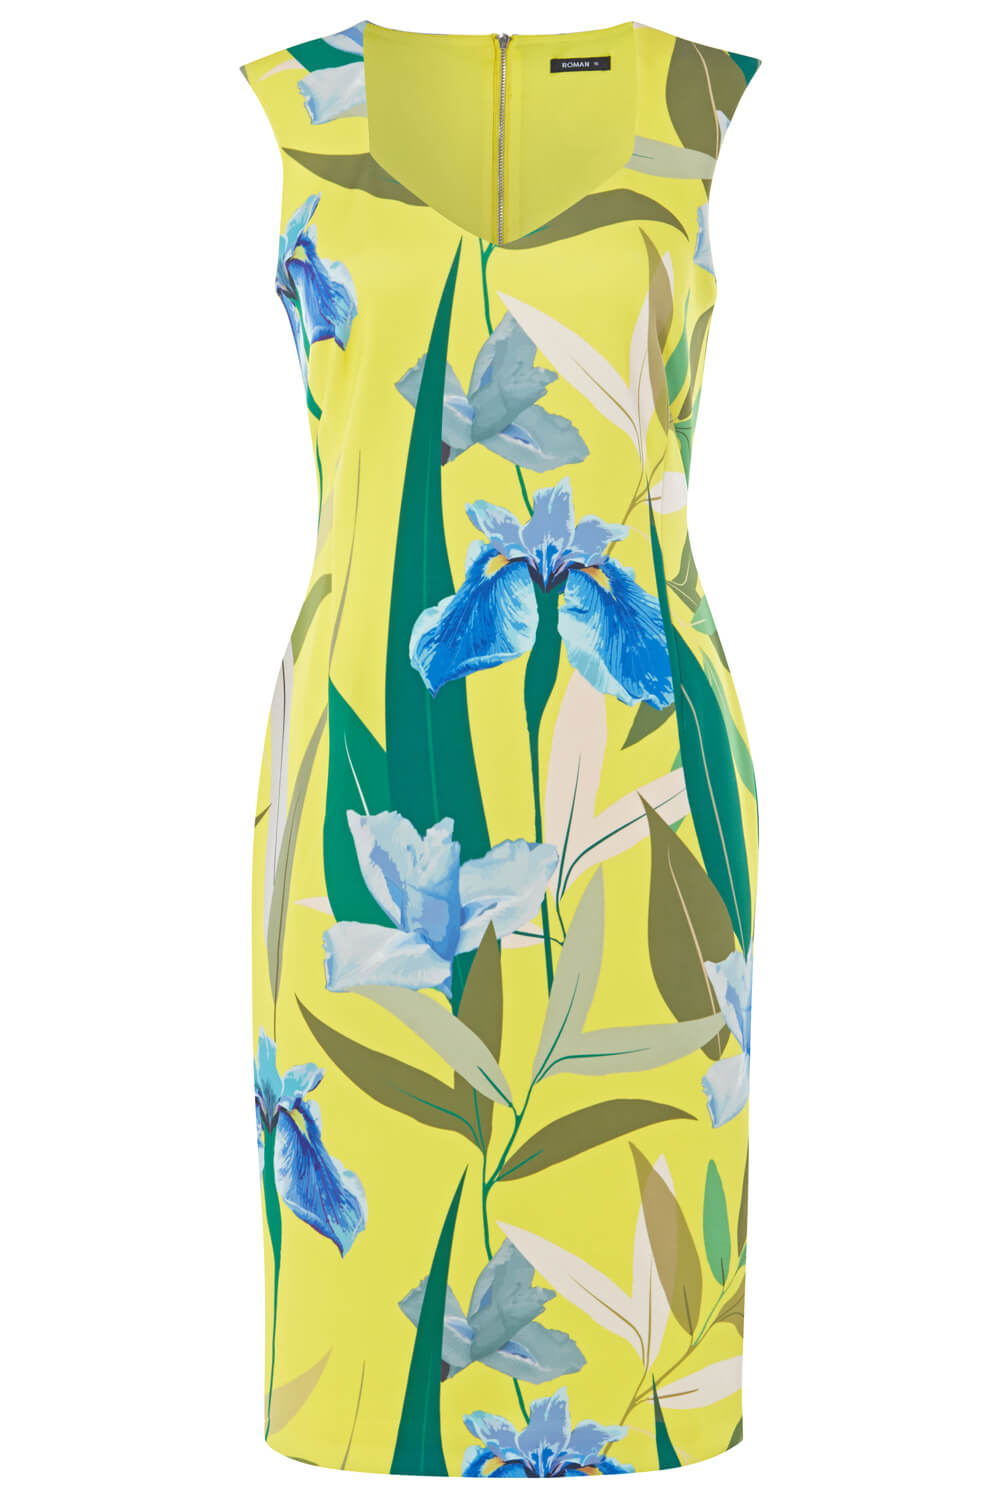 Yellow Floral Printed Scuba Dress, Image 5 of 5